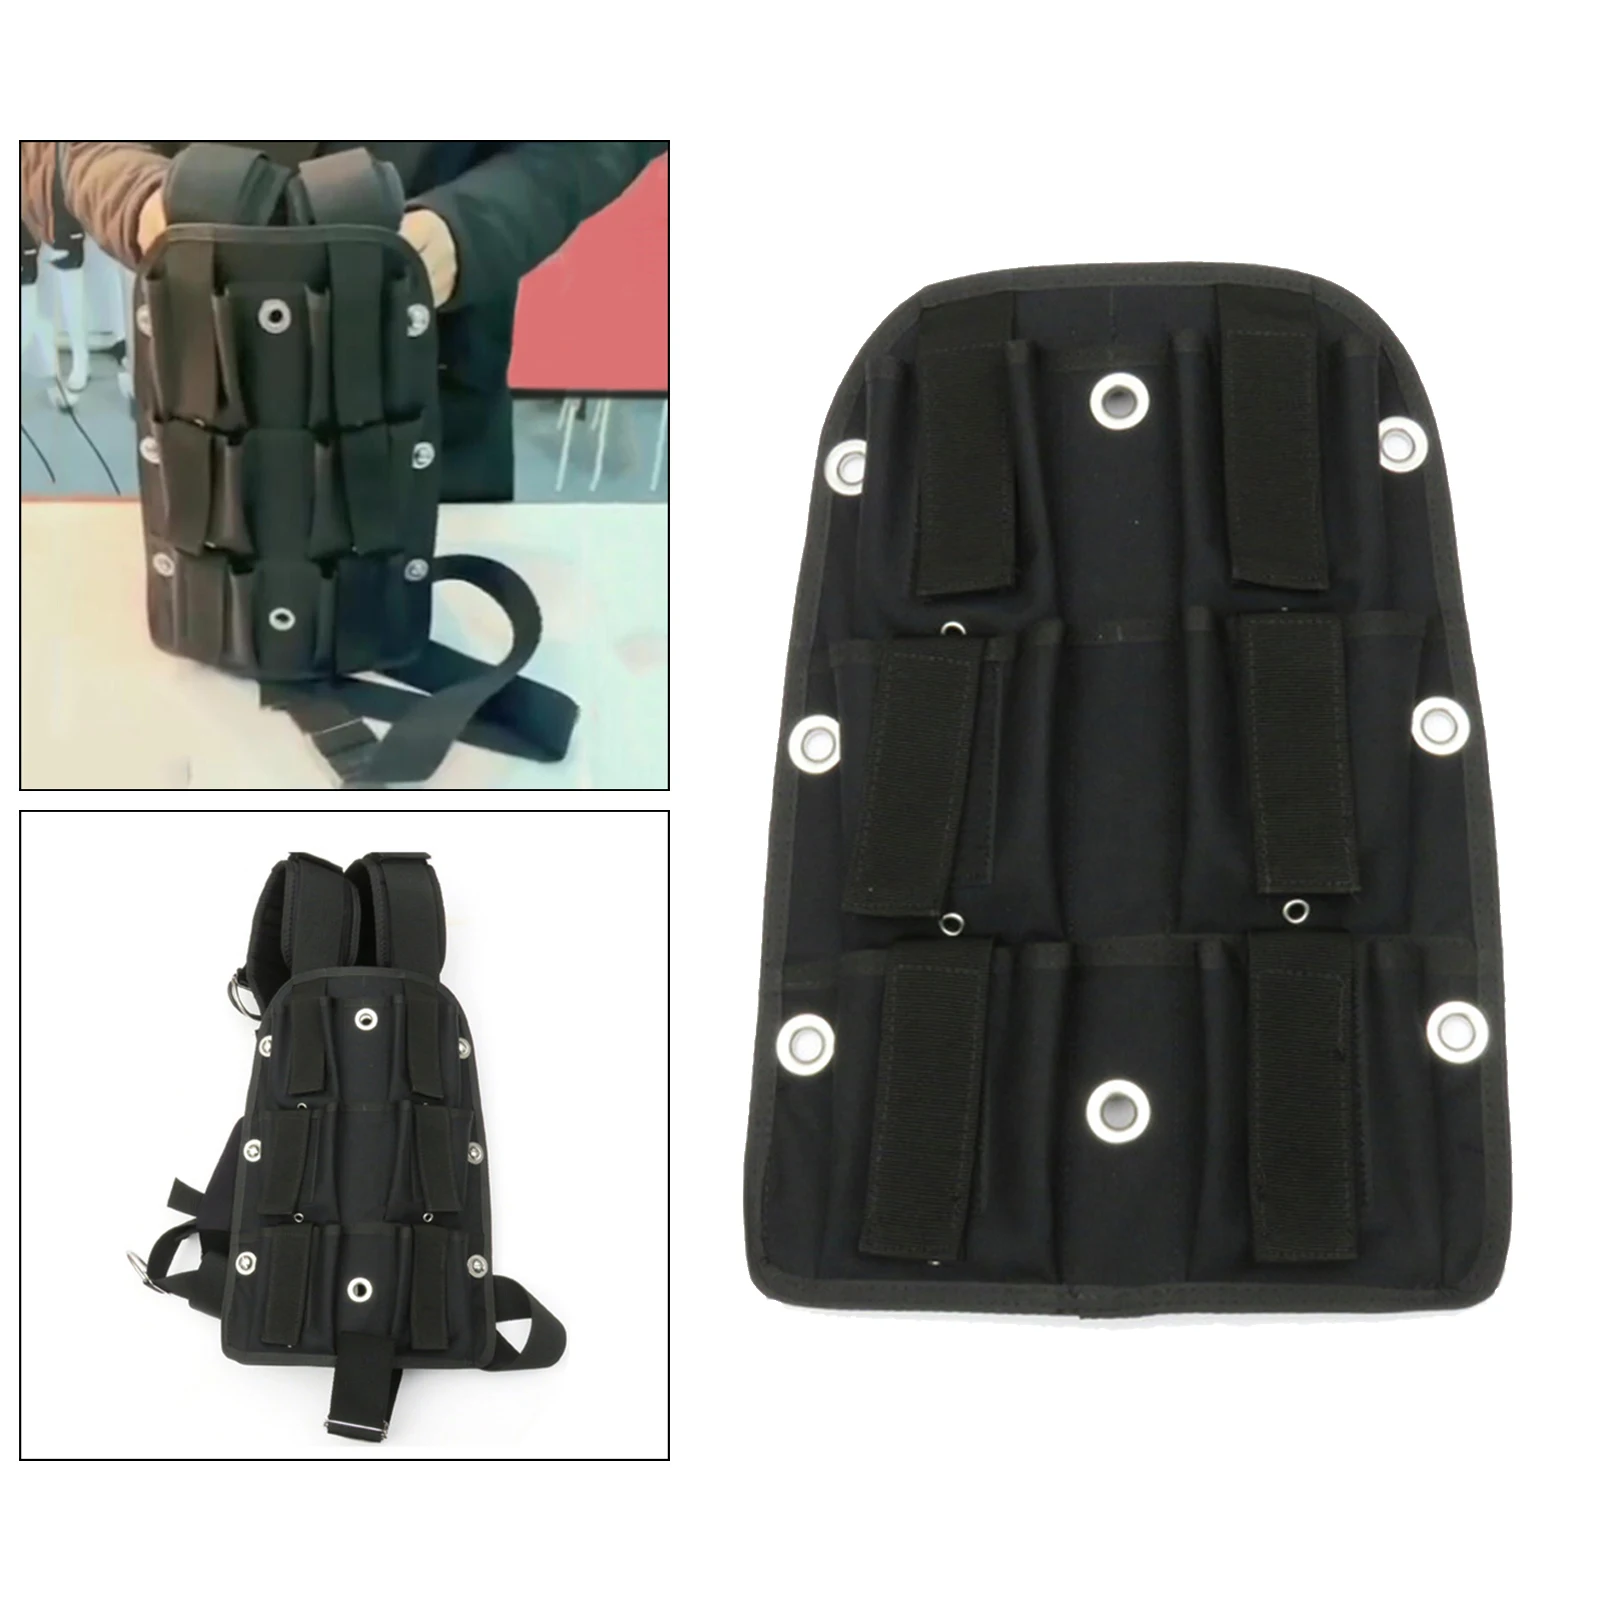 Technical Diving Backplate Wight Plate Storage Pad Scuba Diver Back Plate Harness Pad Dry Suit Holder with 6 Weight Pockets